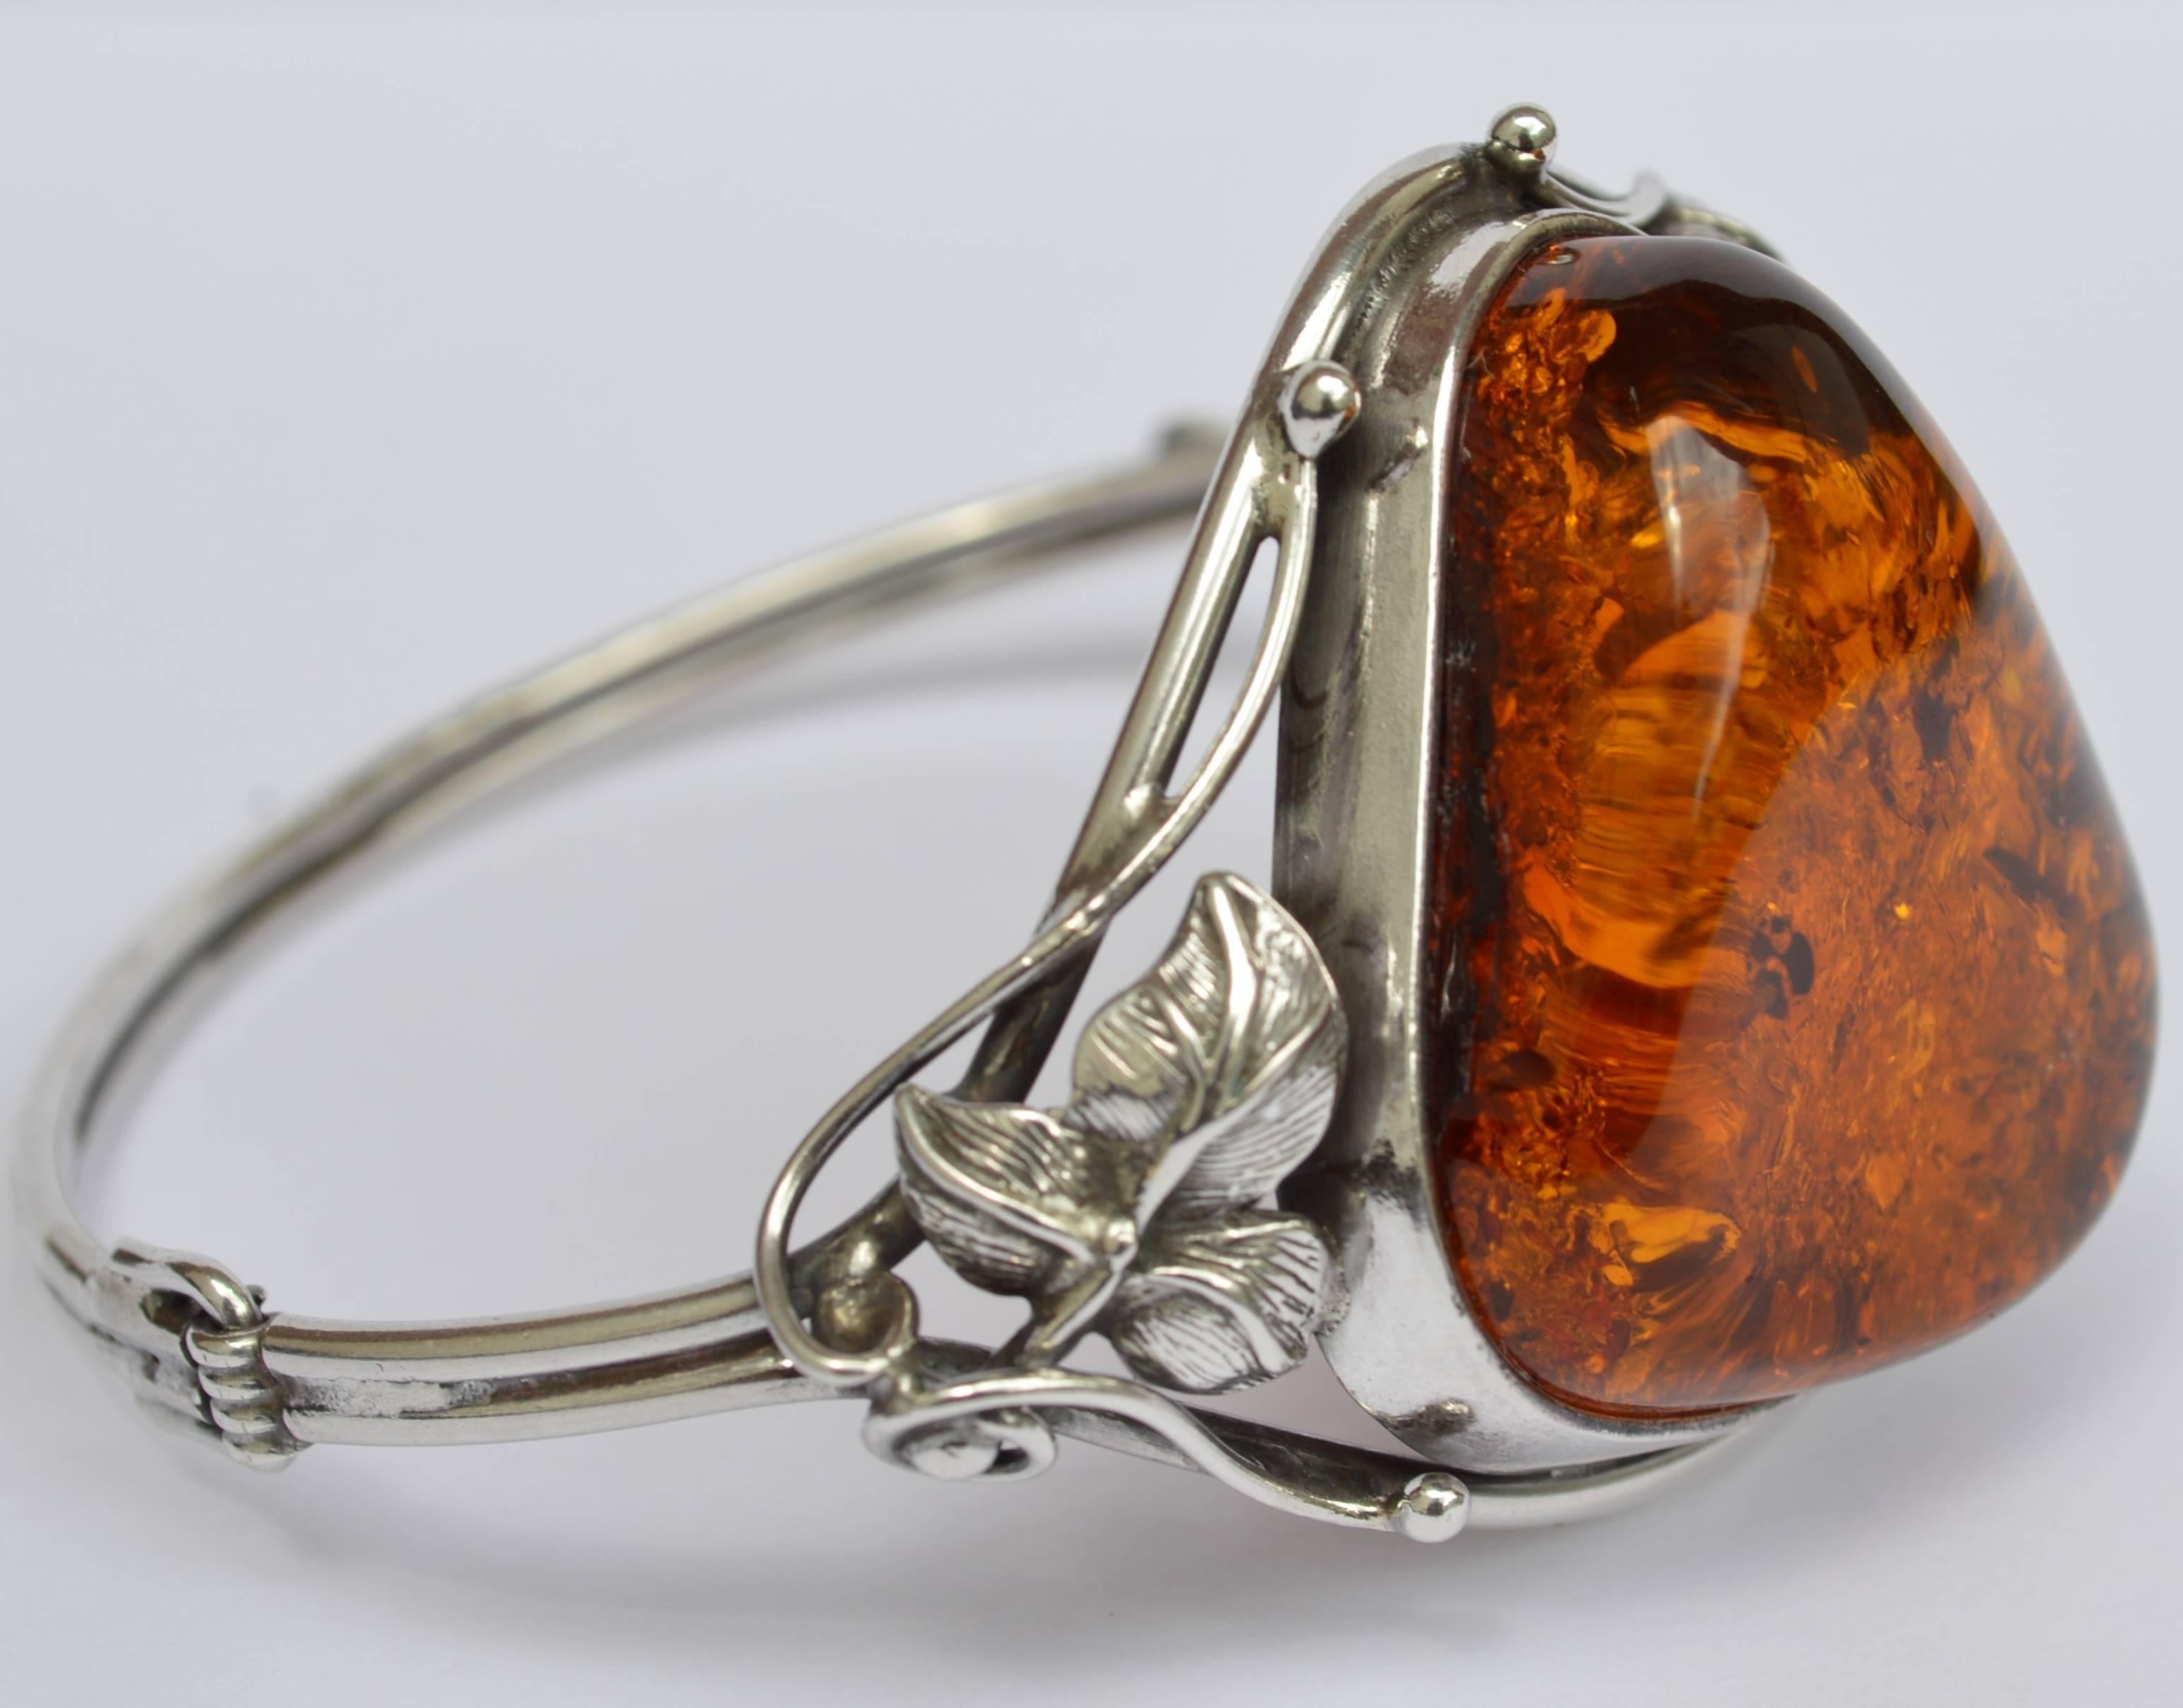 Danish Mid-Century sterling silver bracelet with large amber stone.
This is a beautiful sterling silver bracelet with a large amber stone. Silver leaves of three flank each side of this gorgeous and rather large piece of amber. 
Size 7.
Amber